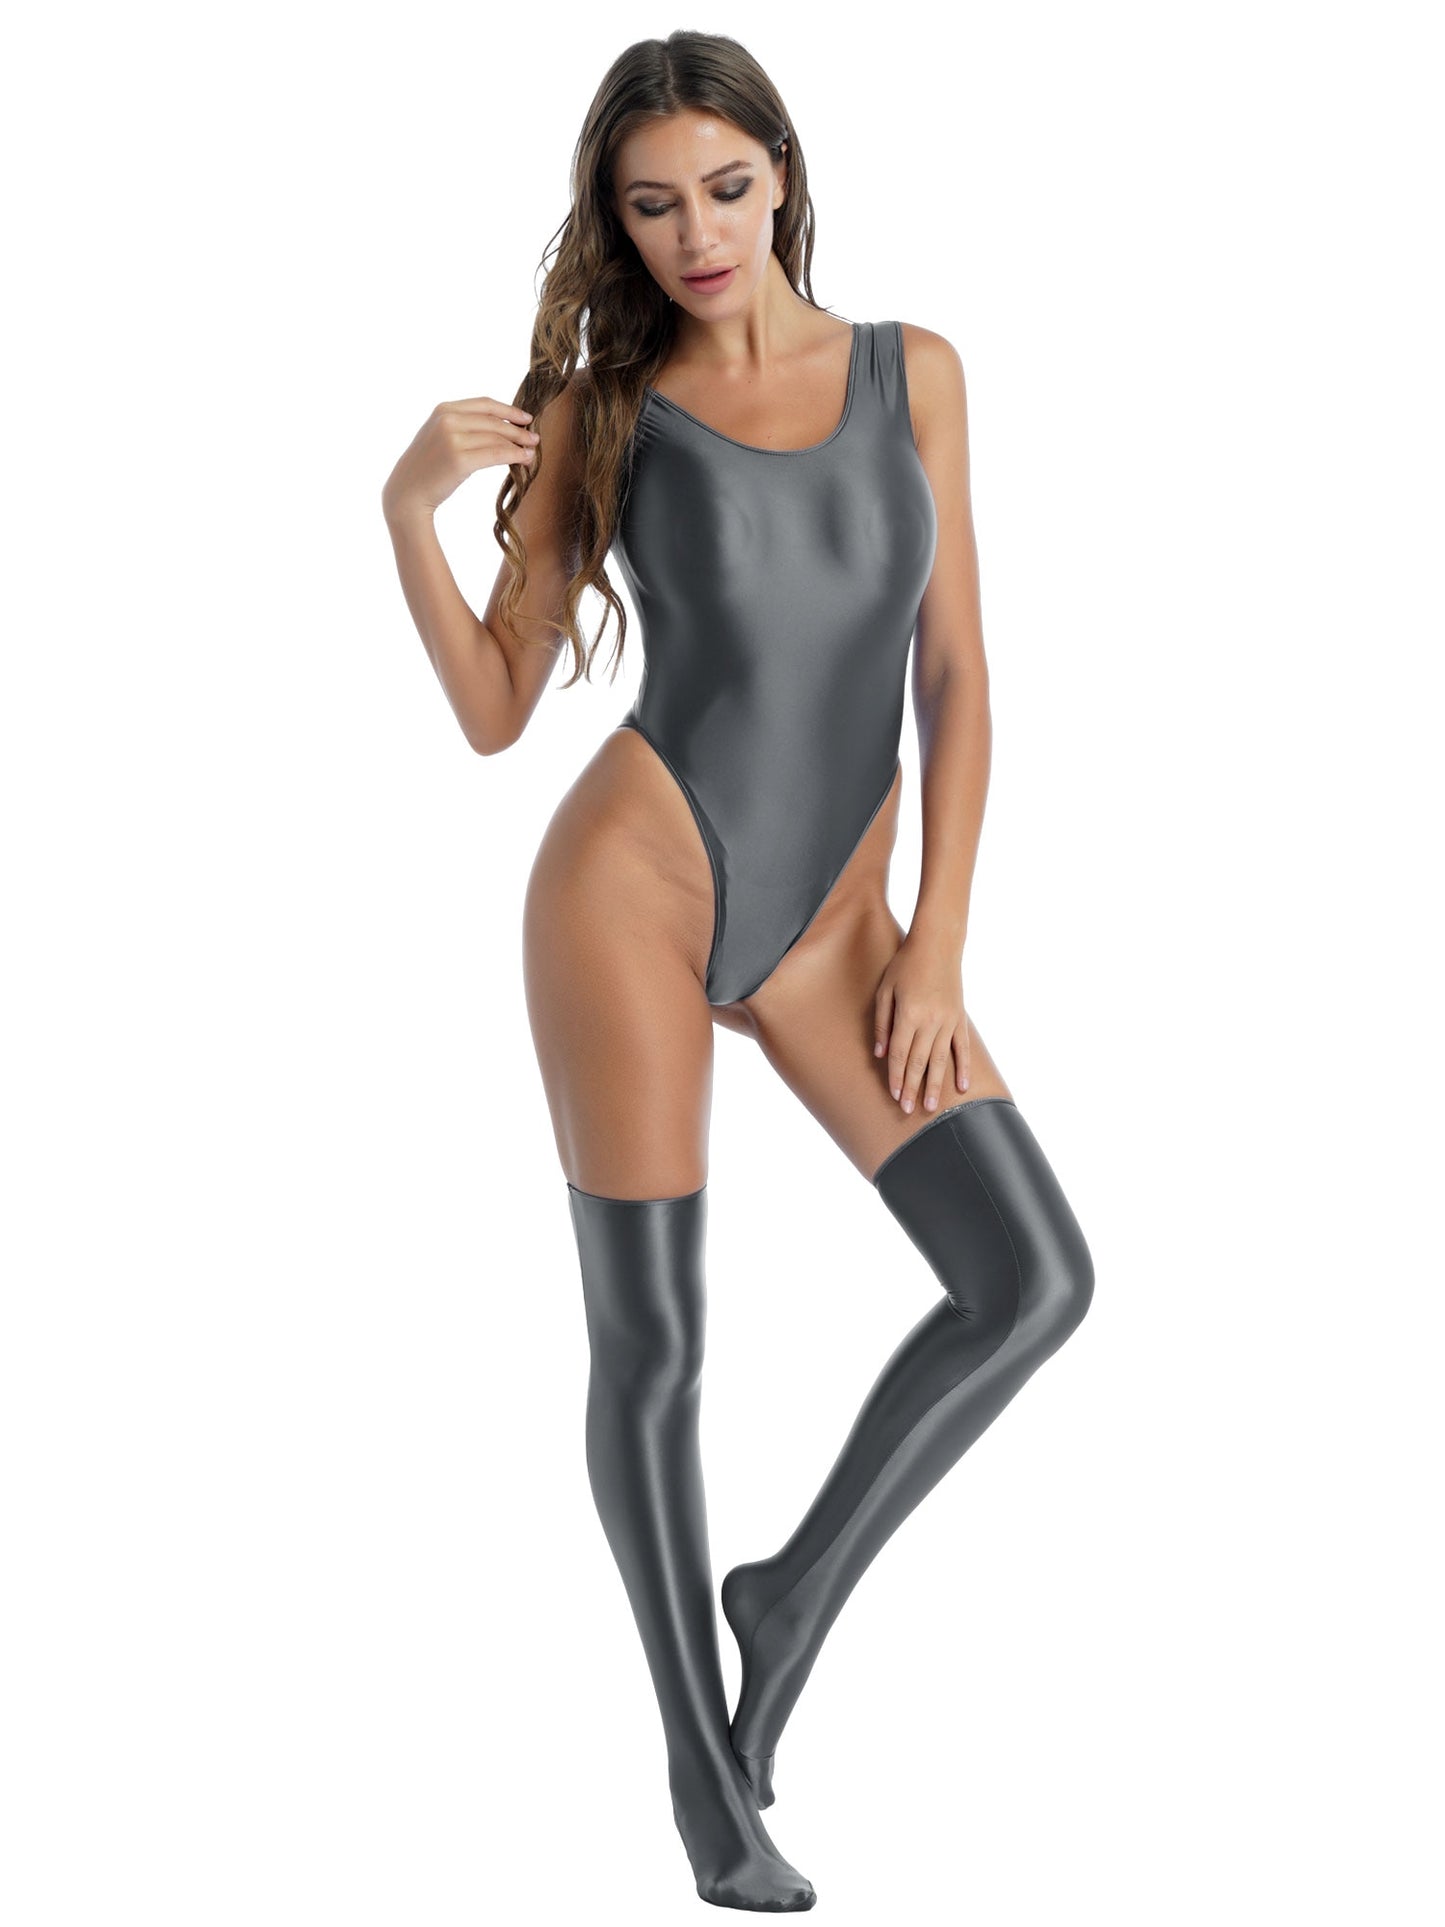 Outer Space Bodysuit and Stockings